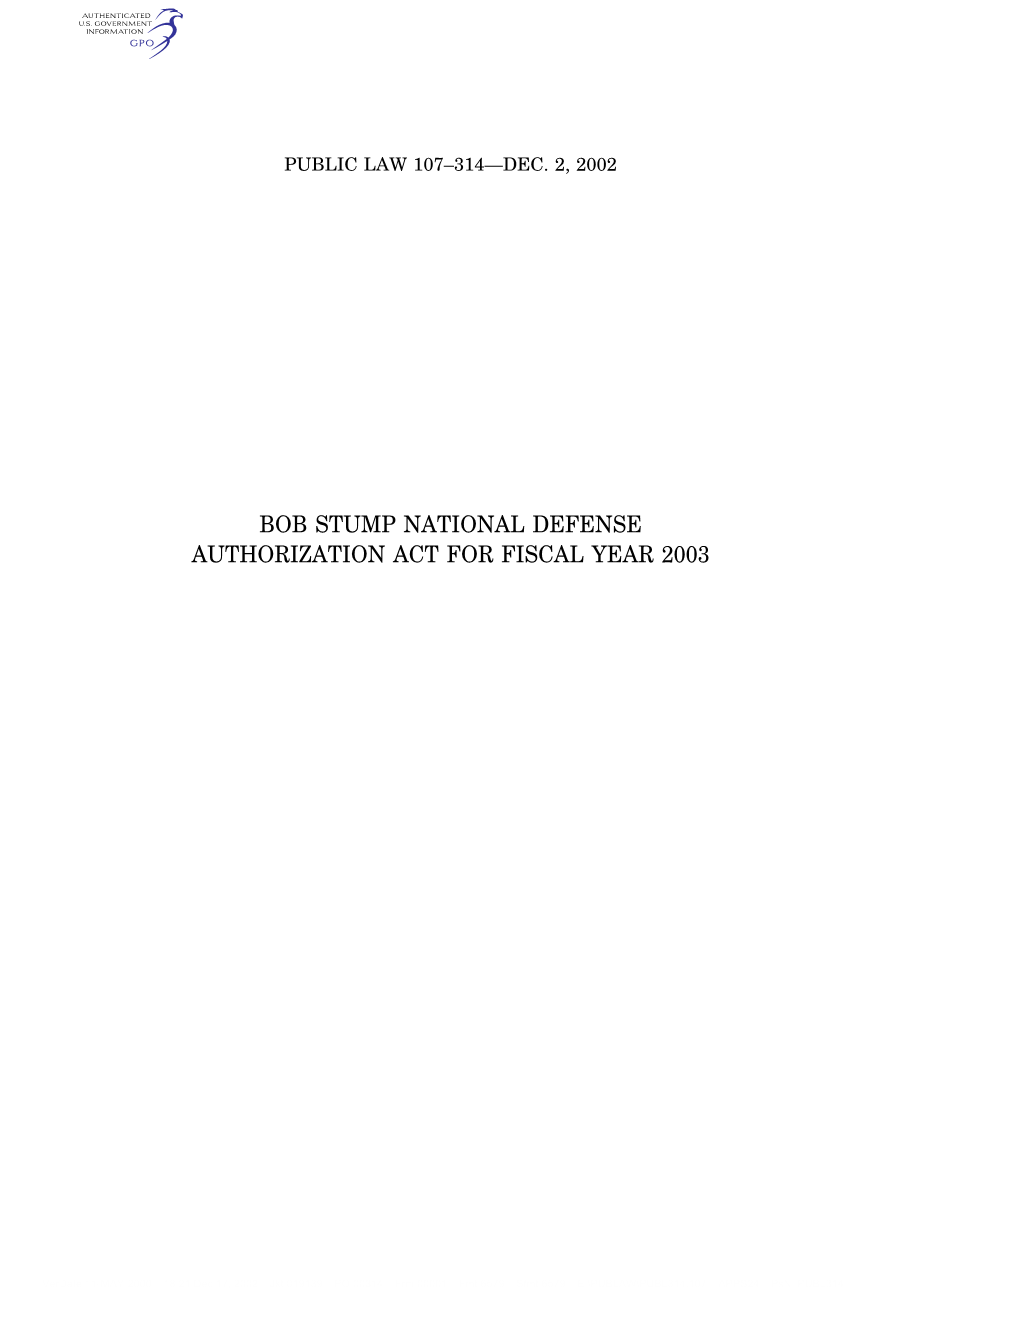 Bob Stump National Defense Authorization Act for Fiscal Year 2003